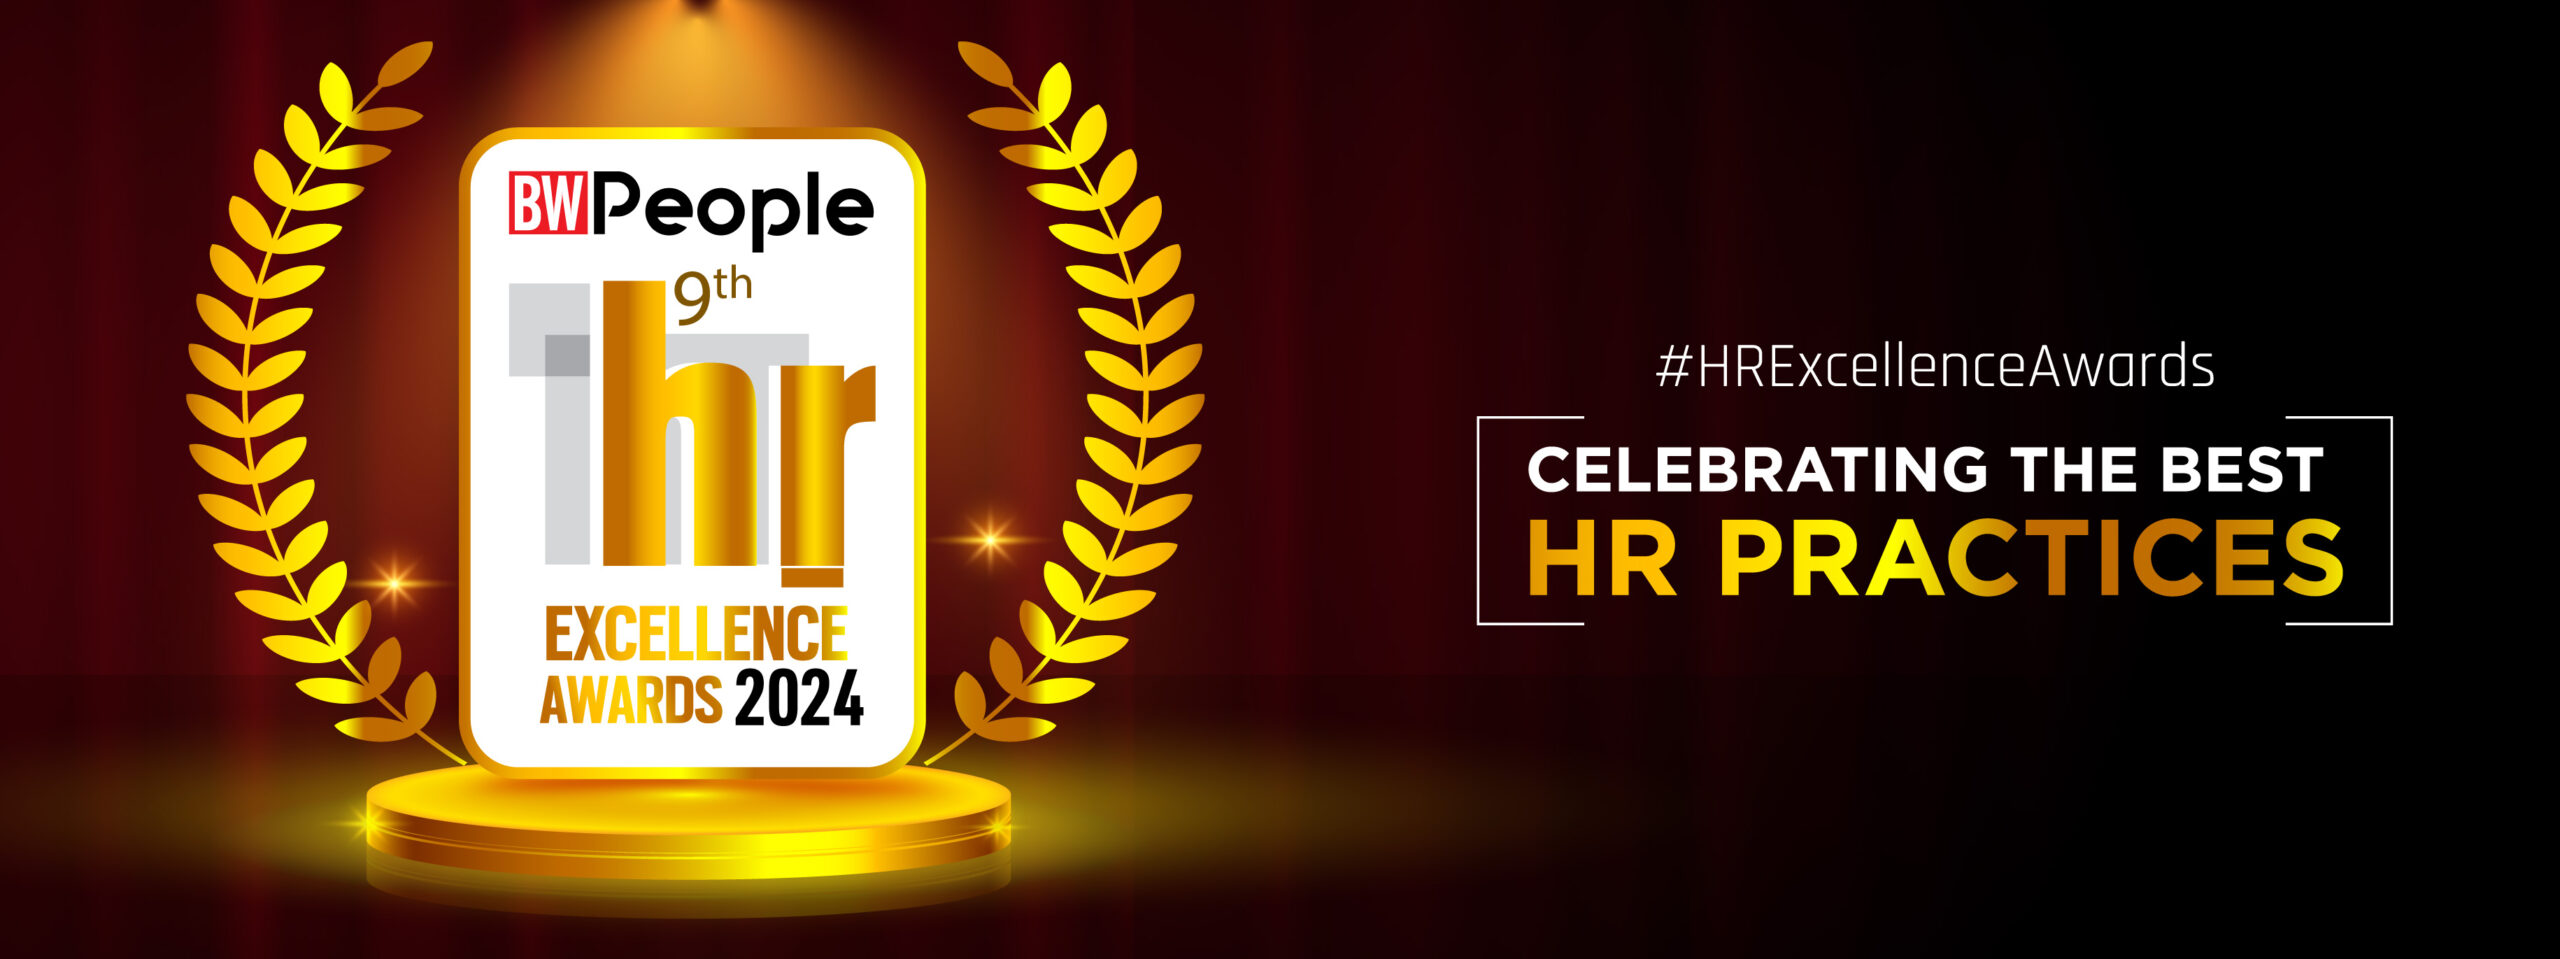 BW People HR Excellence Summit & Awards 2024 BW Businessworld